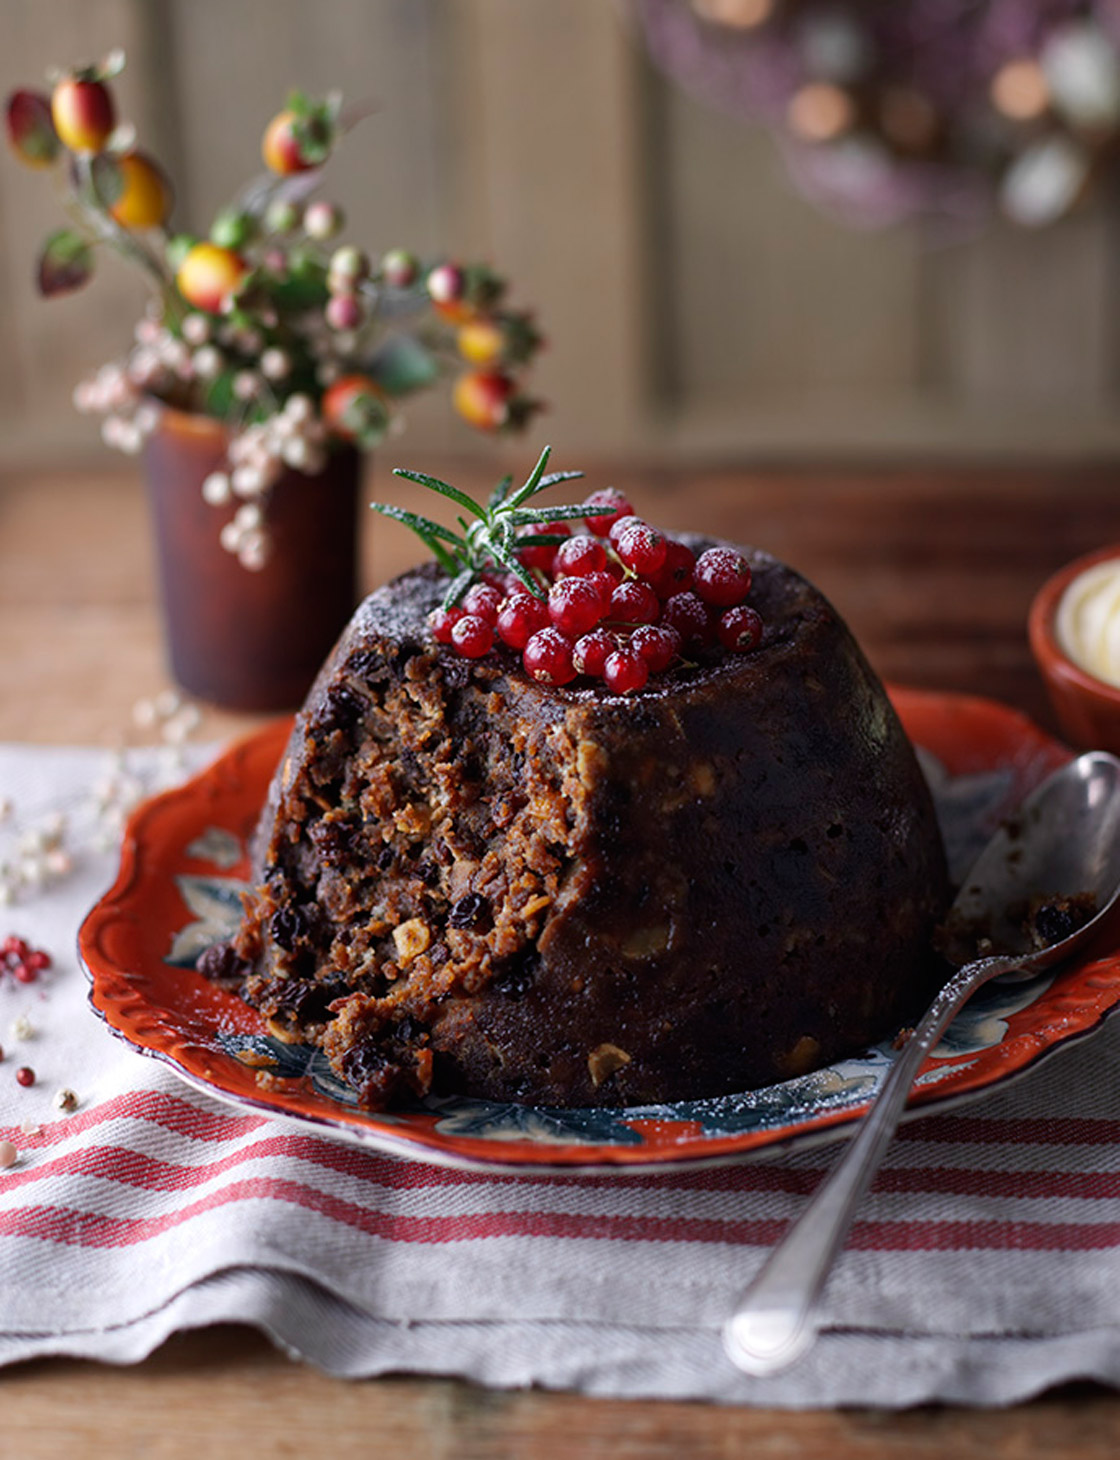 Classic Christmas pudding with brandy butter | Sainsbury’s magazine